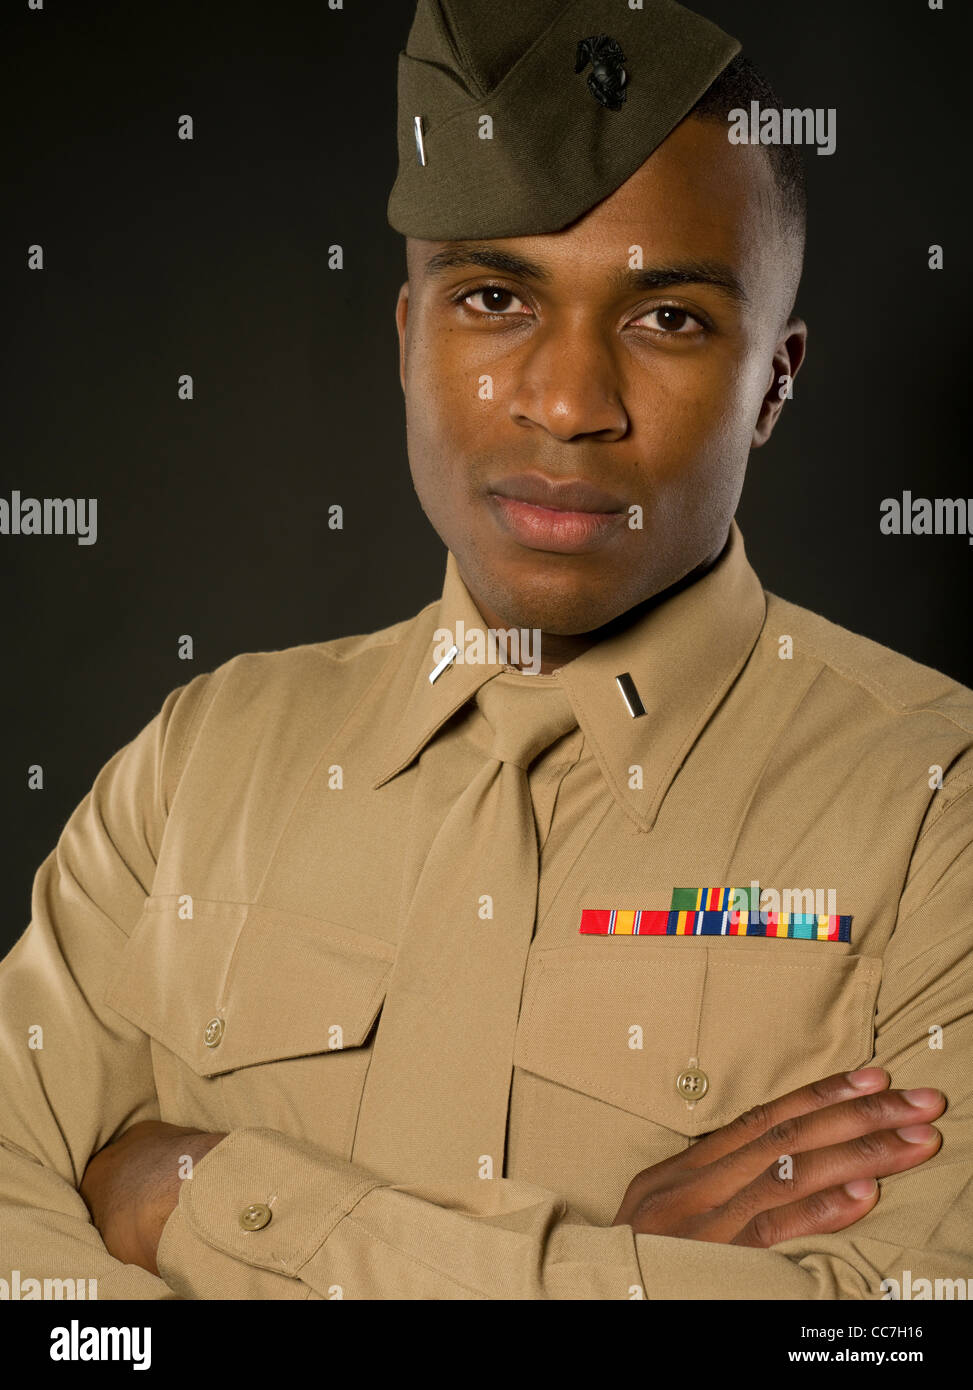 United States Marine Corps Officer in Service B ( Bravos ) Uniform with ...